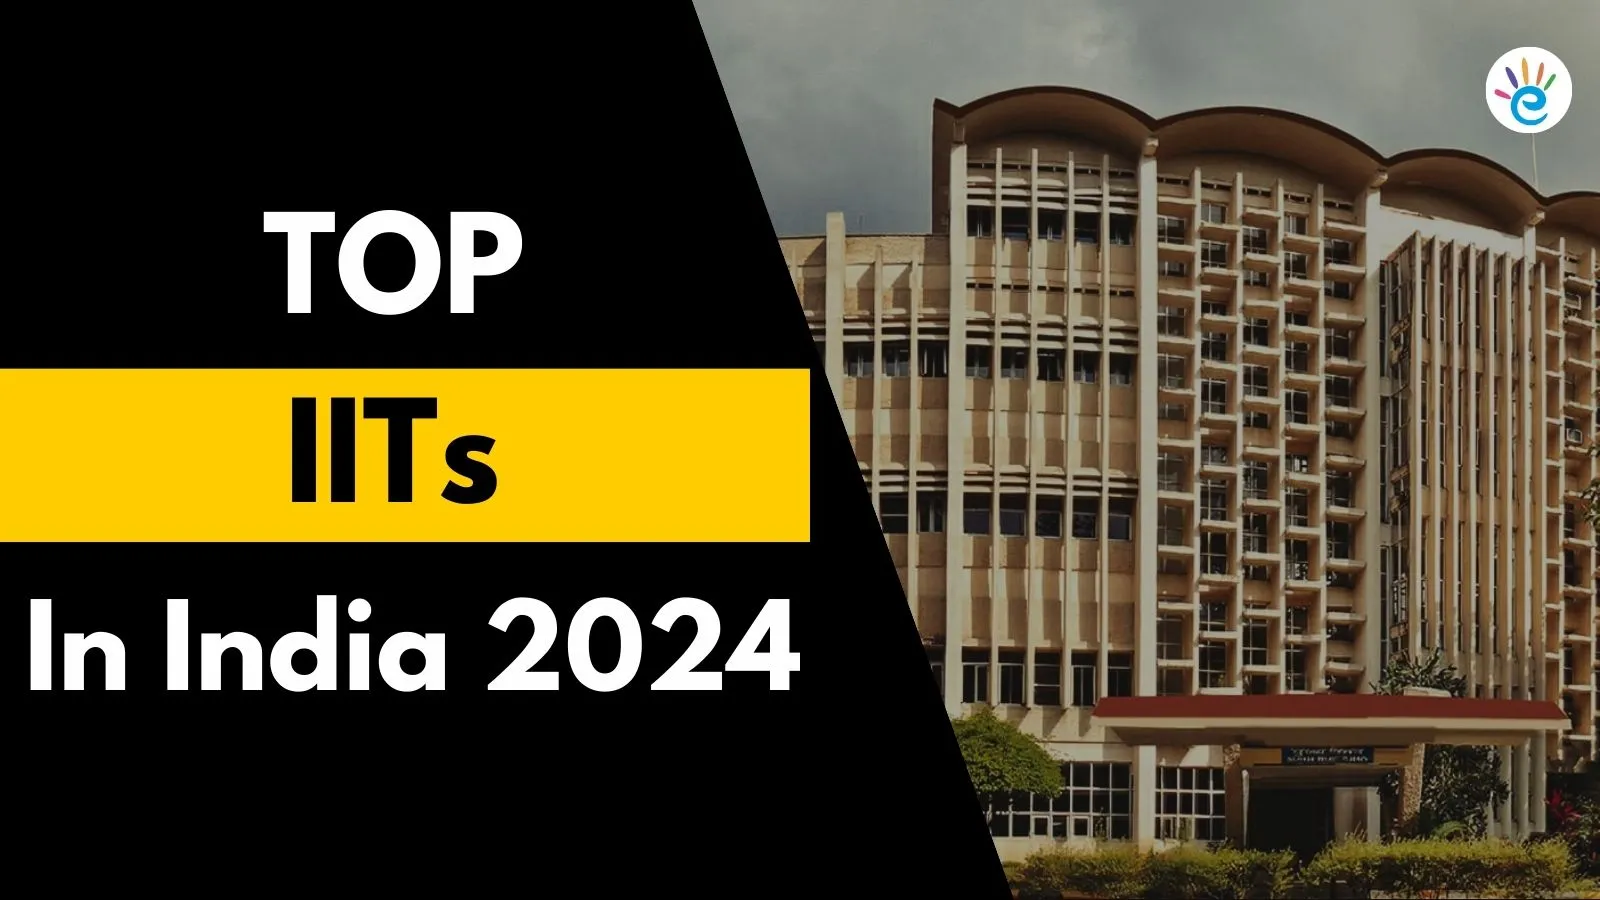 List of Top IITs in India 2024: Rankings, Admission, Courses, Placements